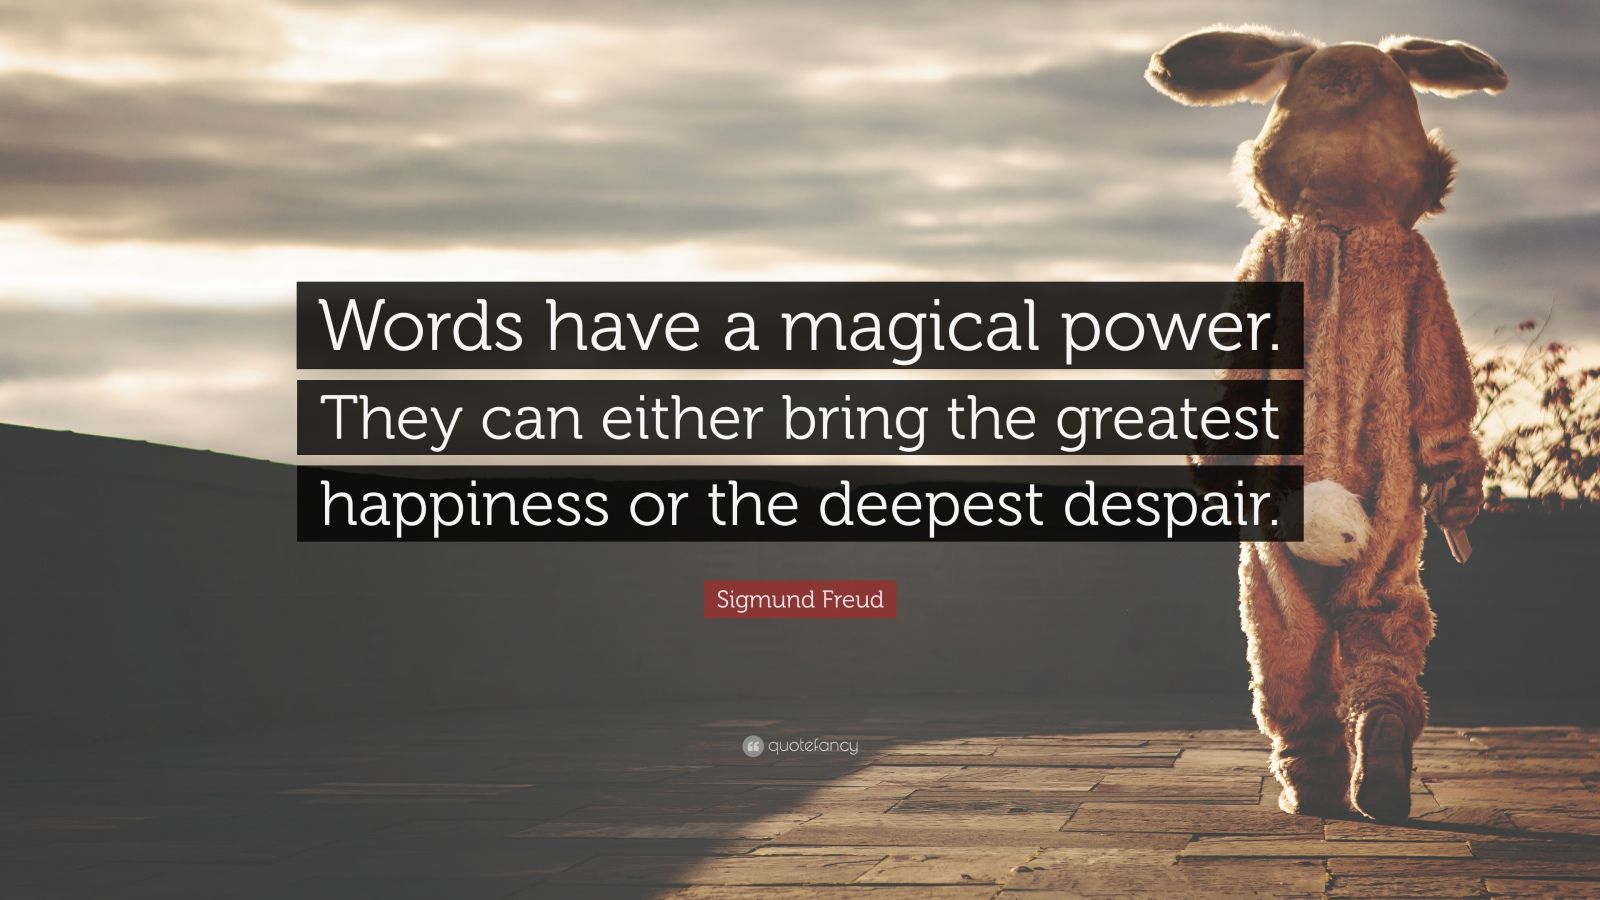 Sigmund Freud Quote: “Words have a magical power. They can either bring